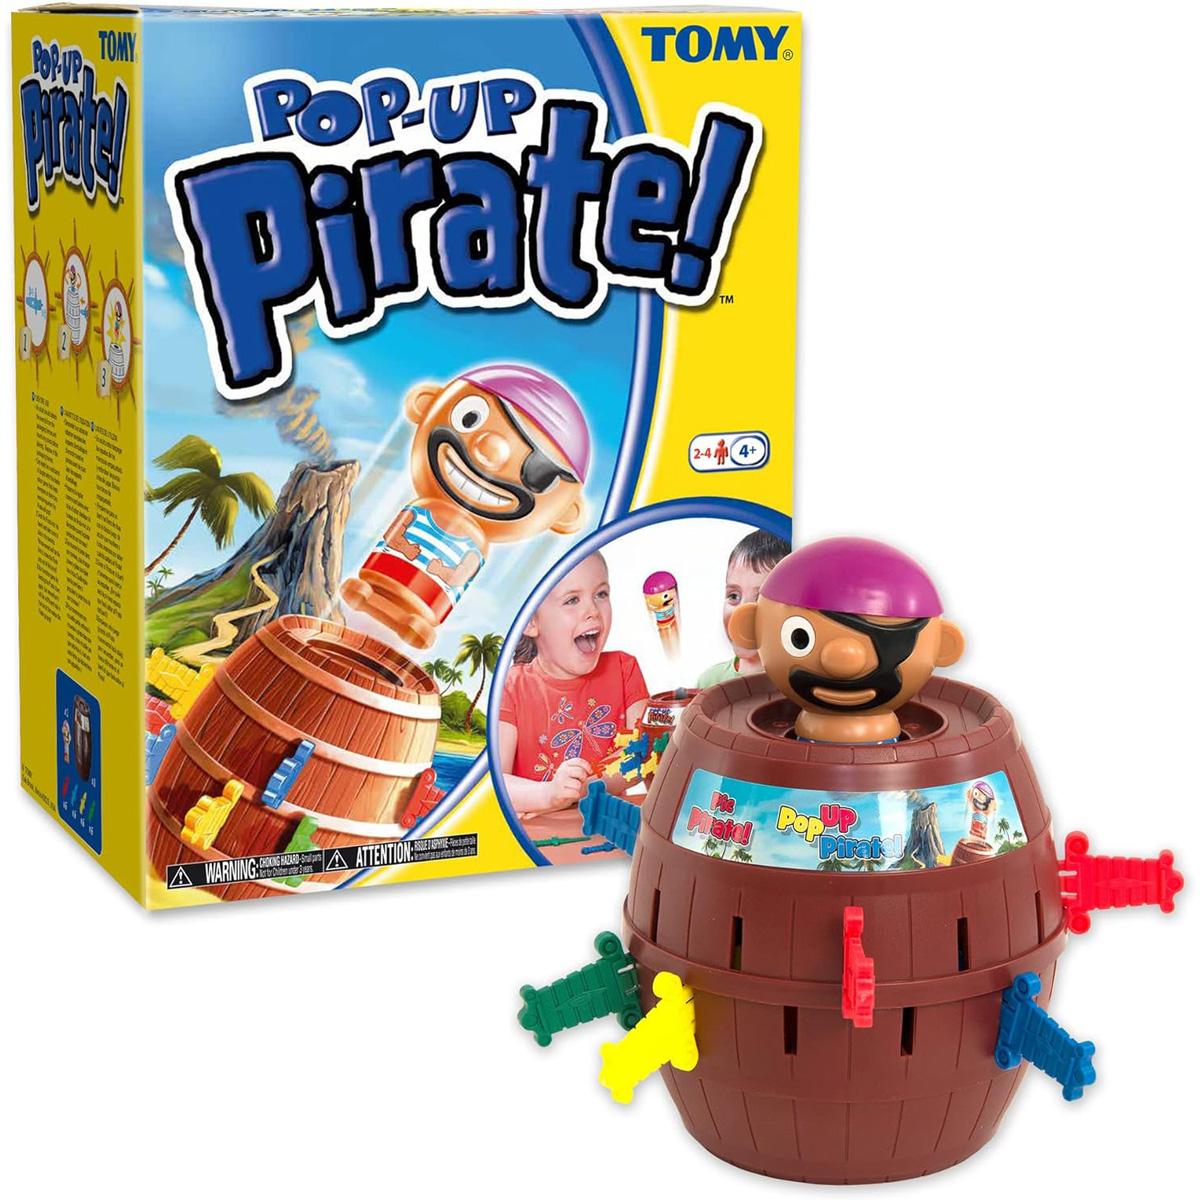 Pop Up Pirate Board Game for $7.50